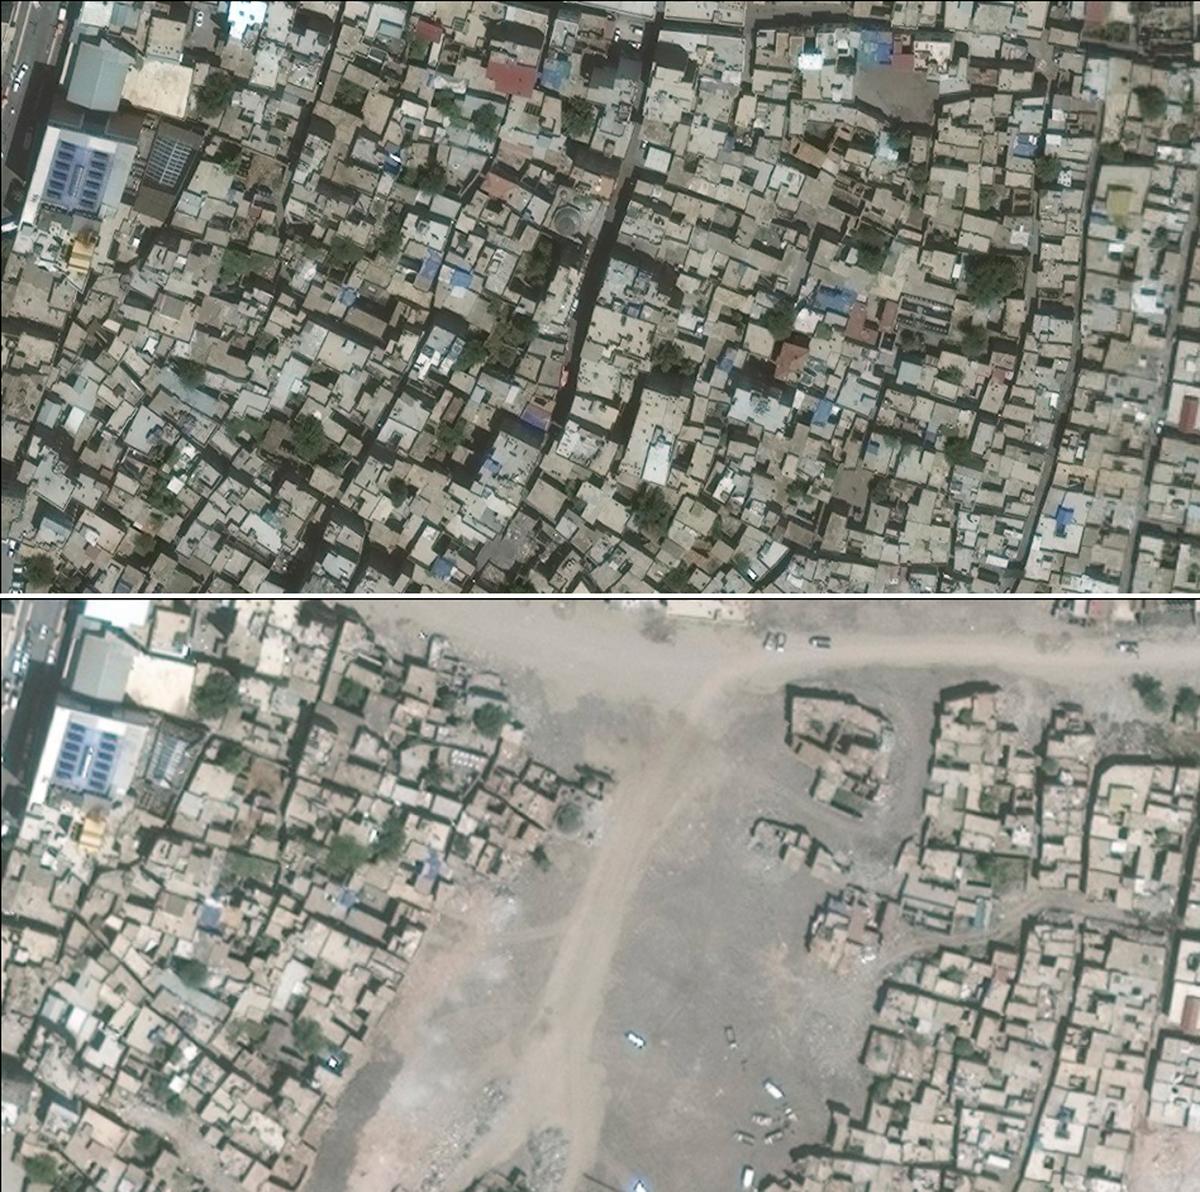 Combo from satellite photos provided by UNOSAT shows the city of Sur in Turkey's Diyarbakir Province on June 22, 2015, top, and on July 26, 2016 bottom. (DigitalGlobe/UNOSAT via AP)